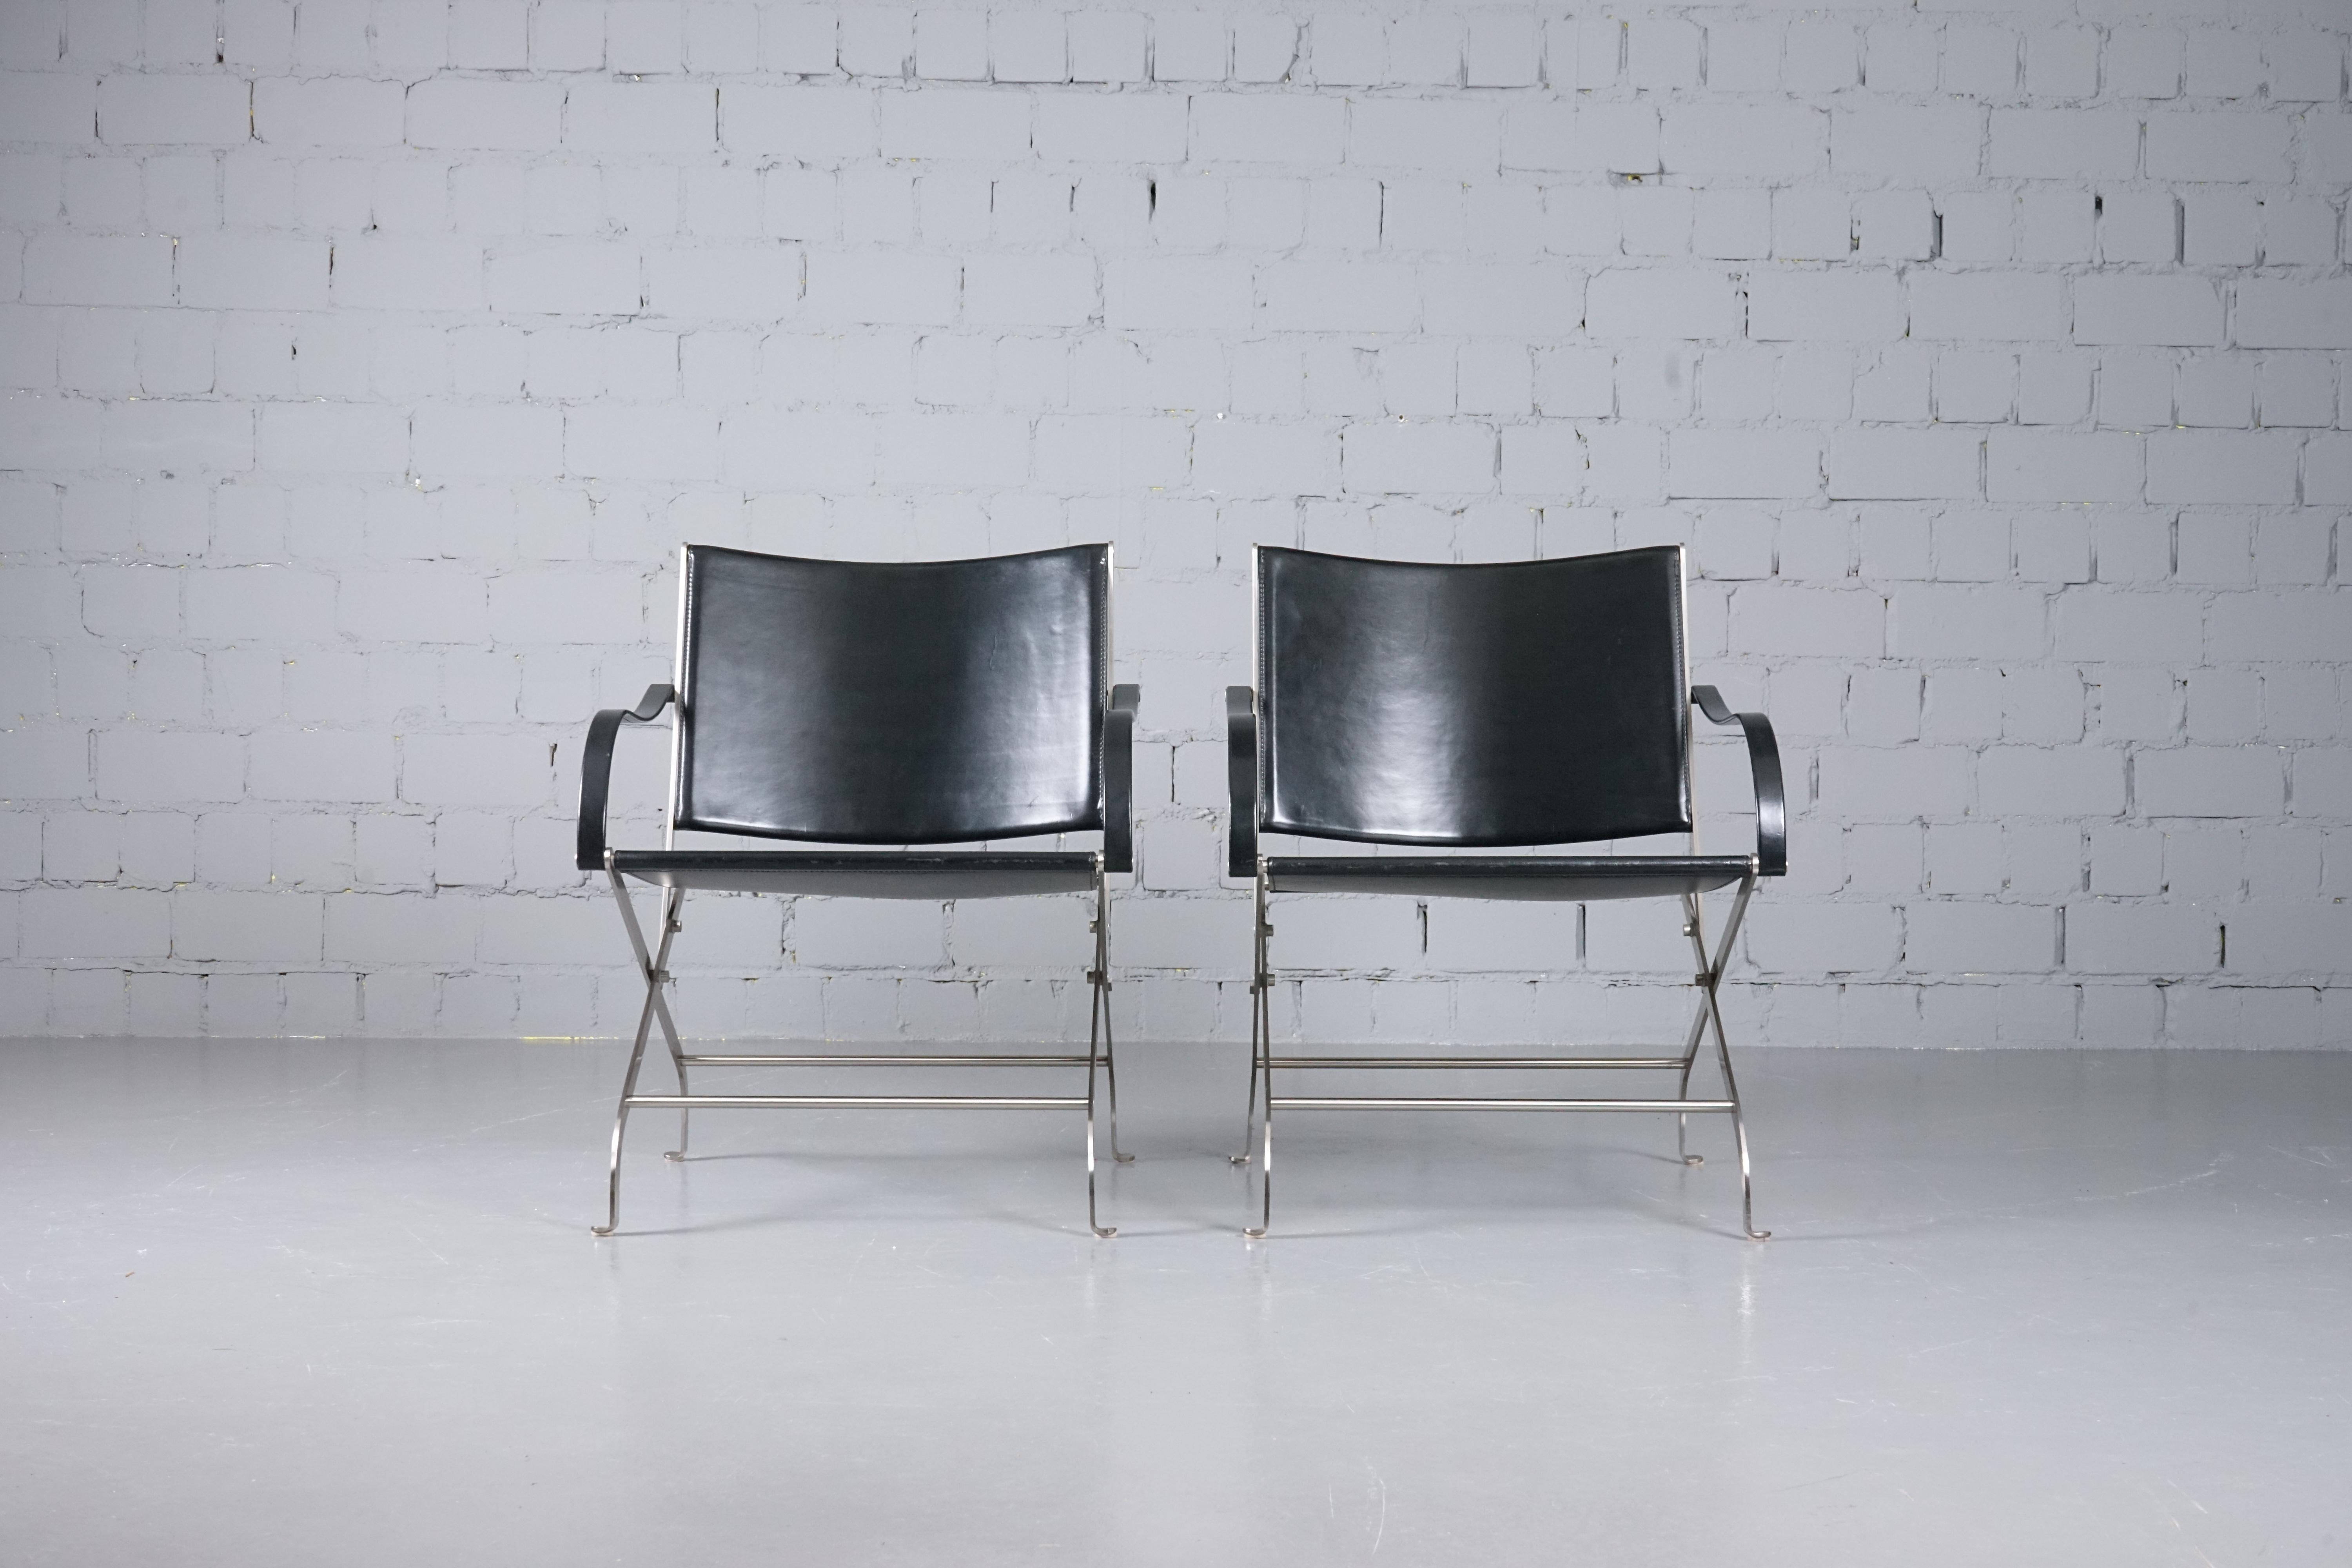 Steel 2x Armchair and 1x Stool Modell Carlotta by Antonio Citterio for Flexform, 1990s For Sale